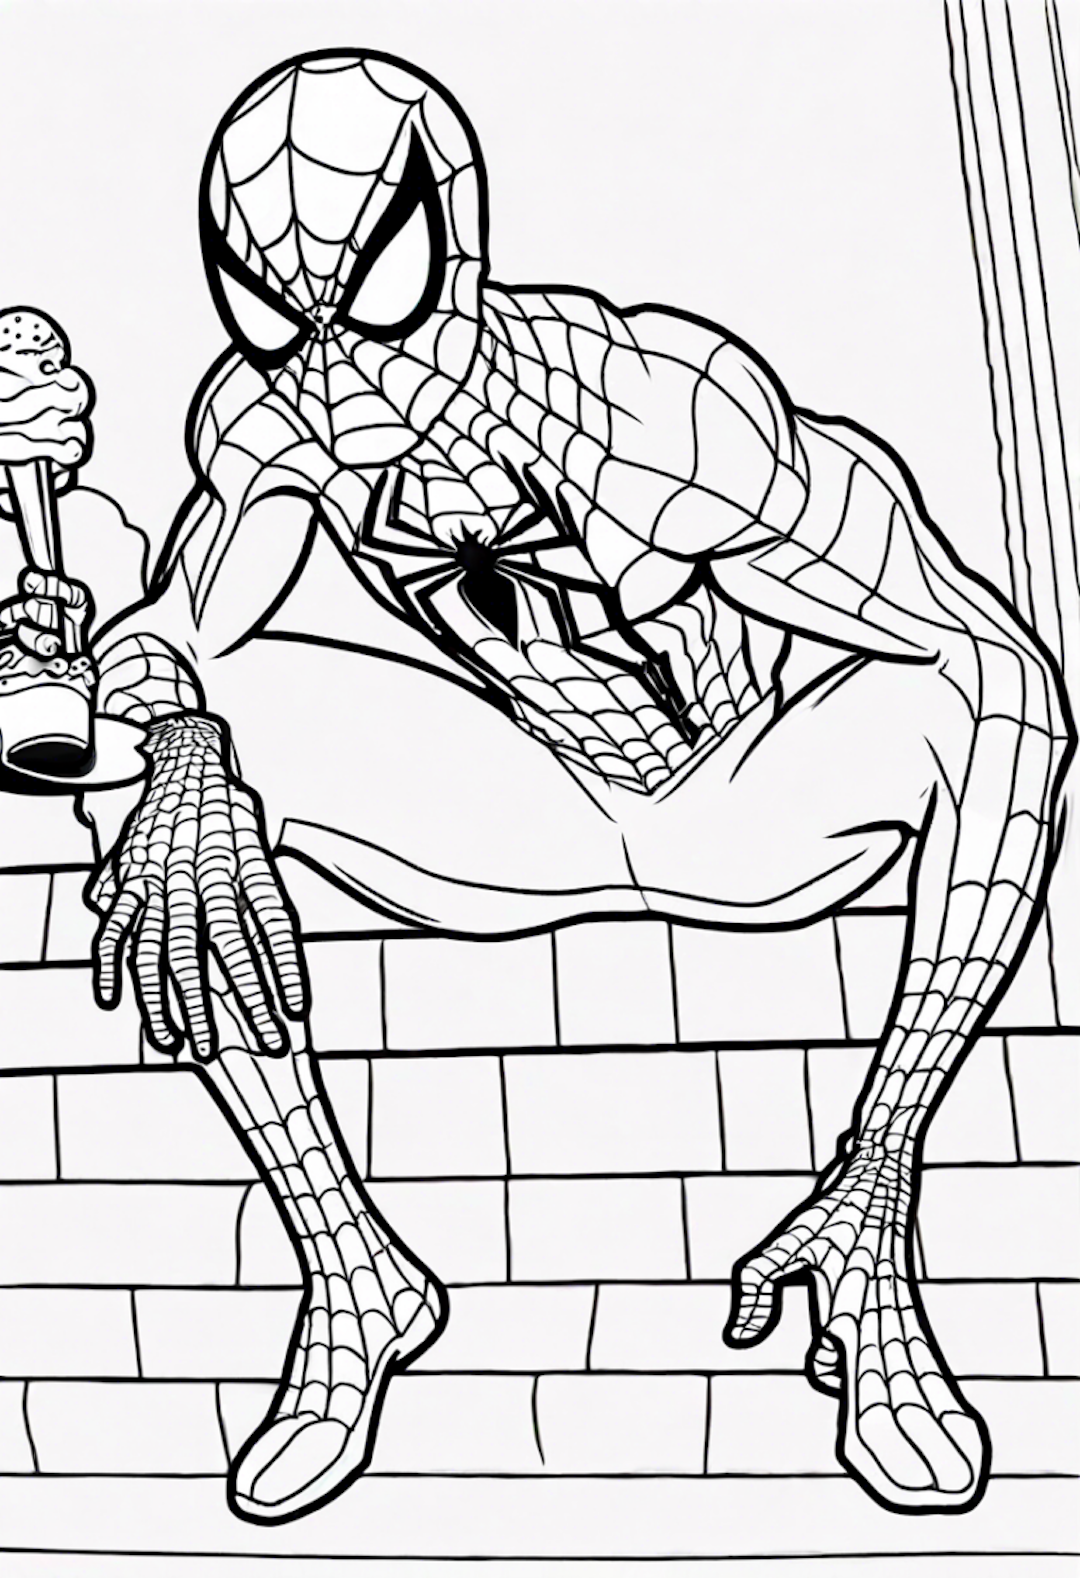 Spiderman At The Ice Cream Parlor coloring pages